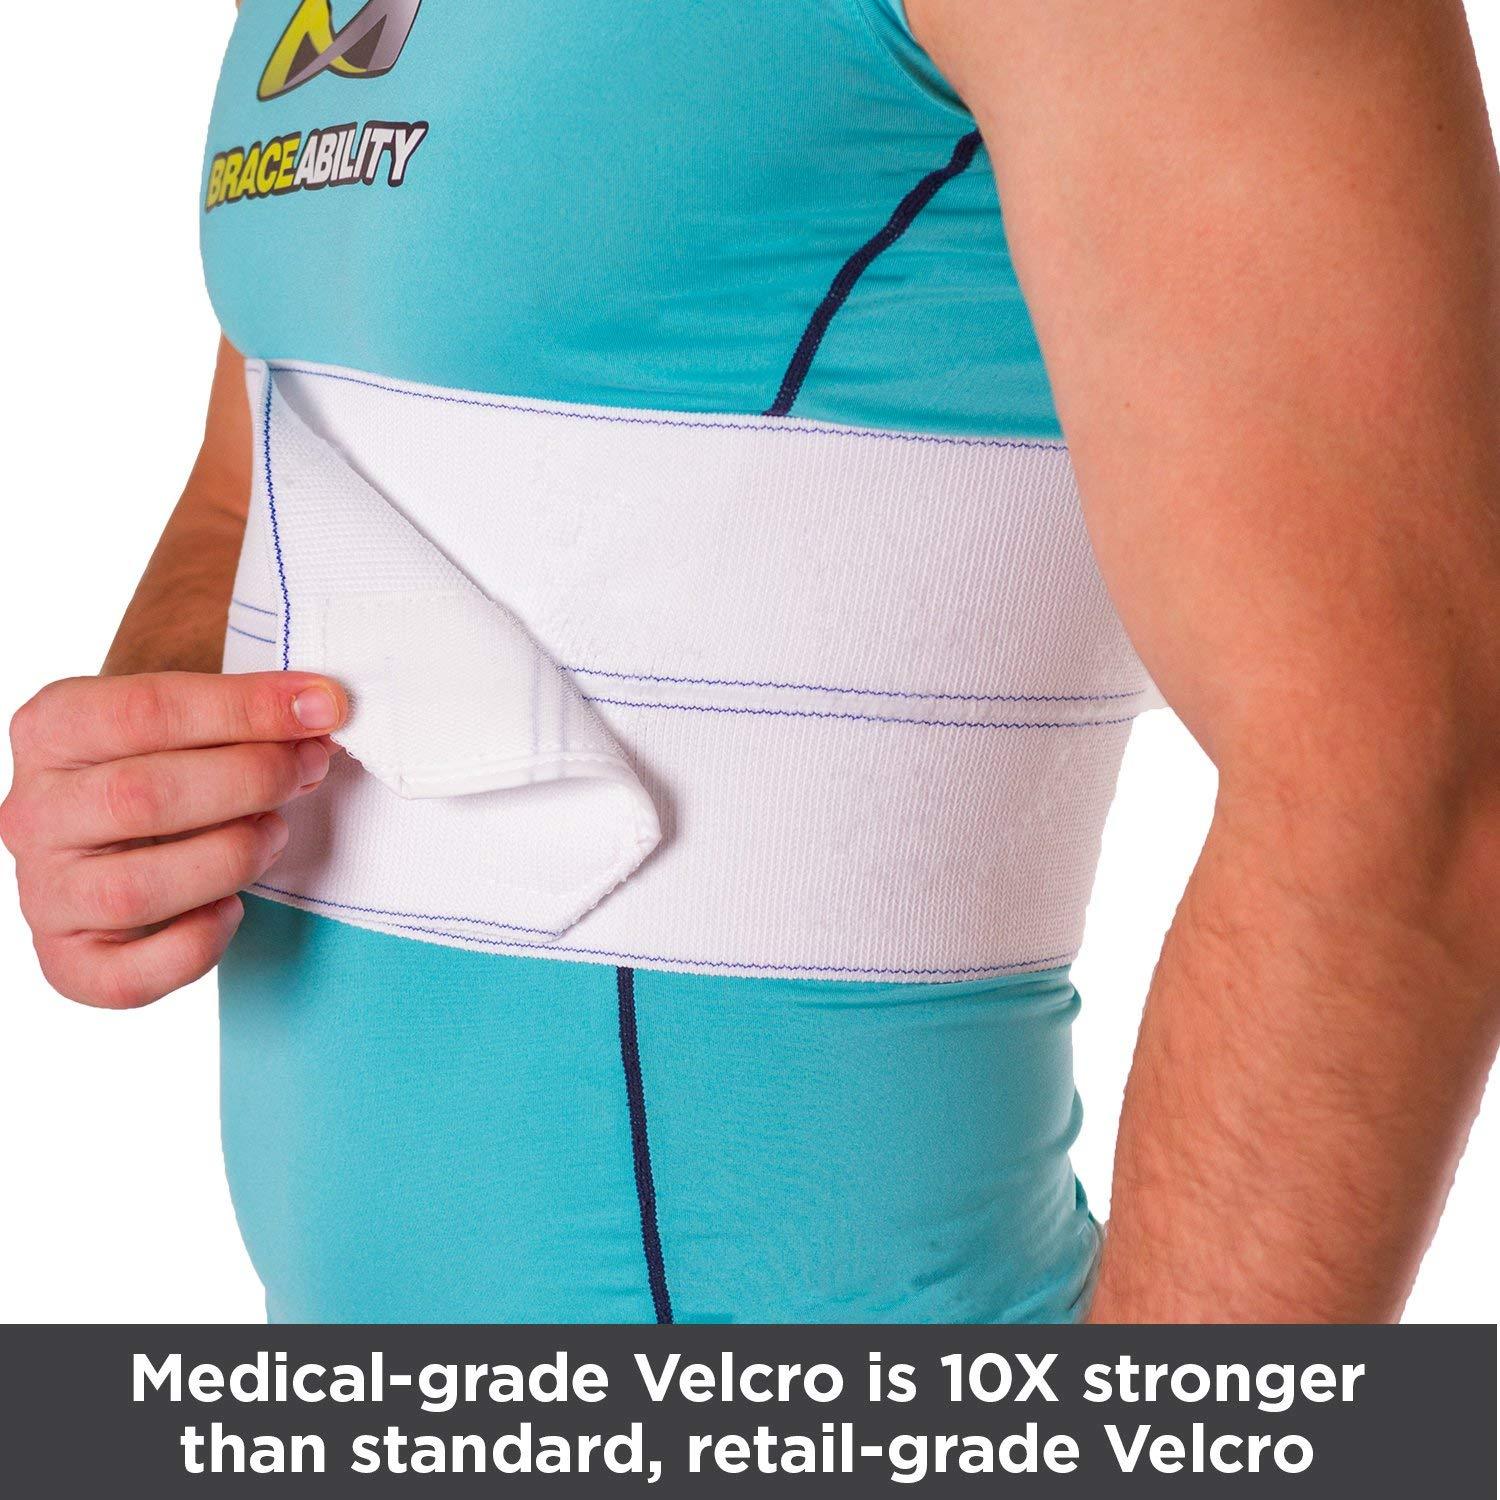  Rib Belt Chest Binder for Broken Injury Ribs, Elastic Rib Brace  Compression Support to Reduce Rib Cage Pain, Fractured, Dislocated and  Post-Surgery Ribs (S (25 to 33)) : Health & Household